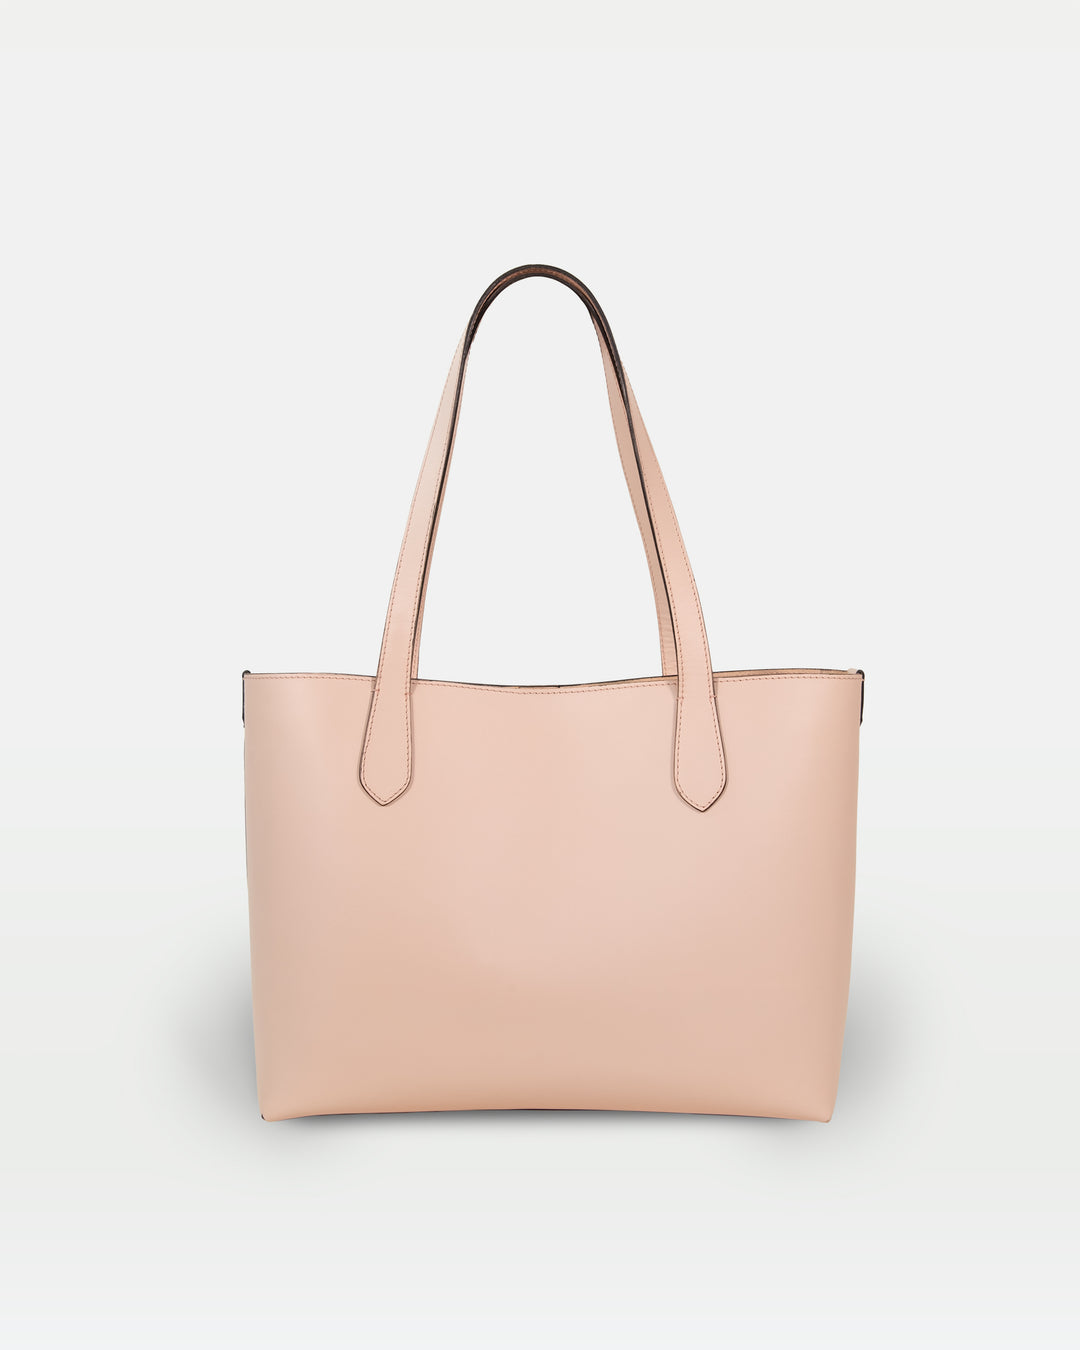 MODHER tote bag in Rosa vegetable tanned Italian leather#color_rosa